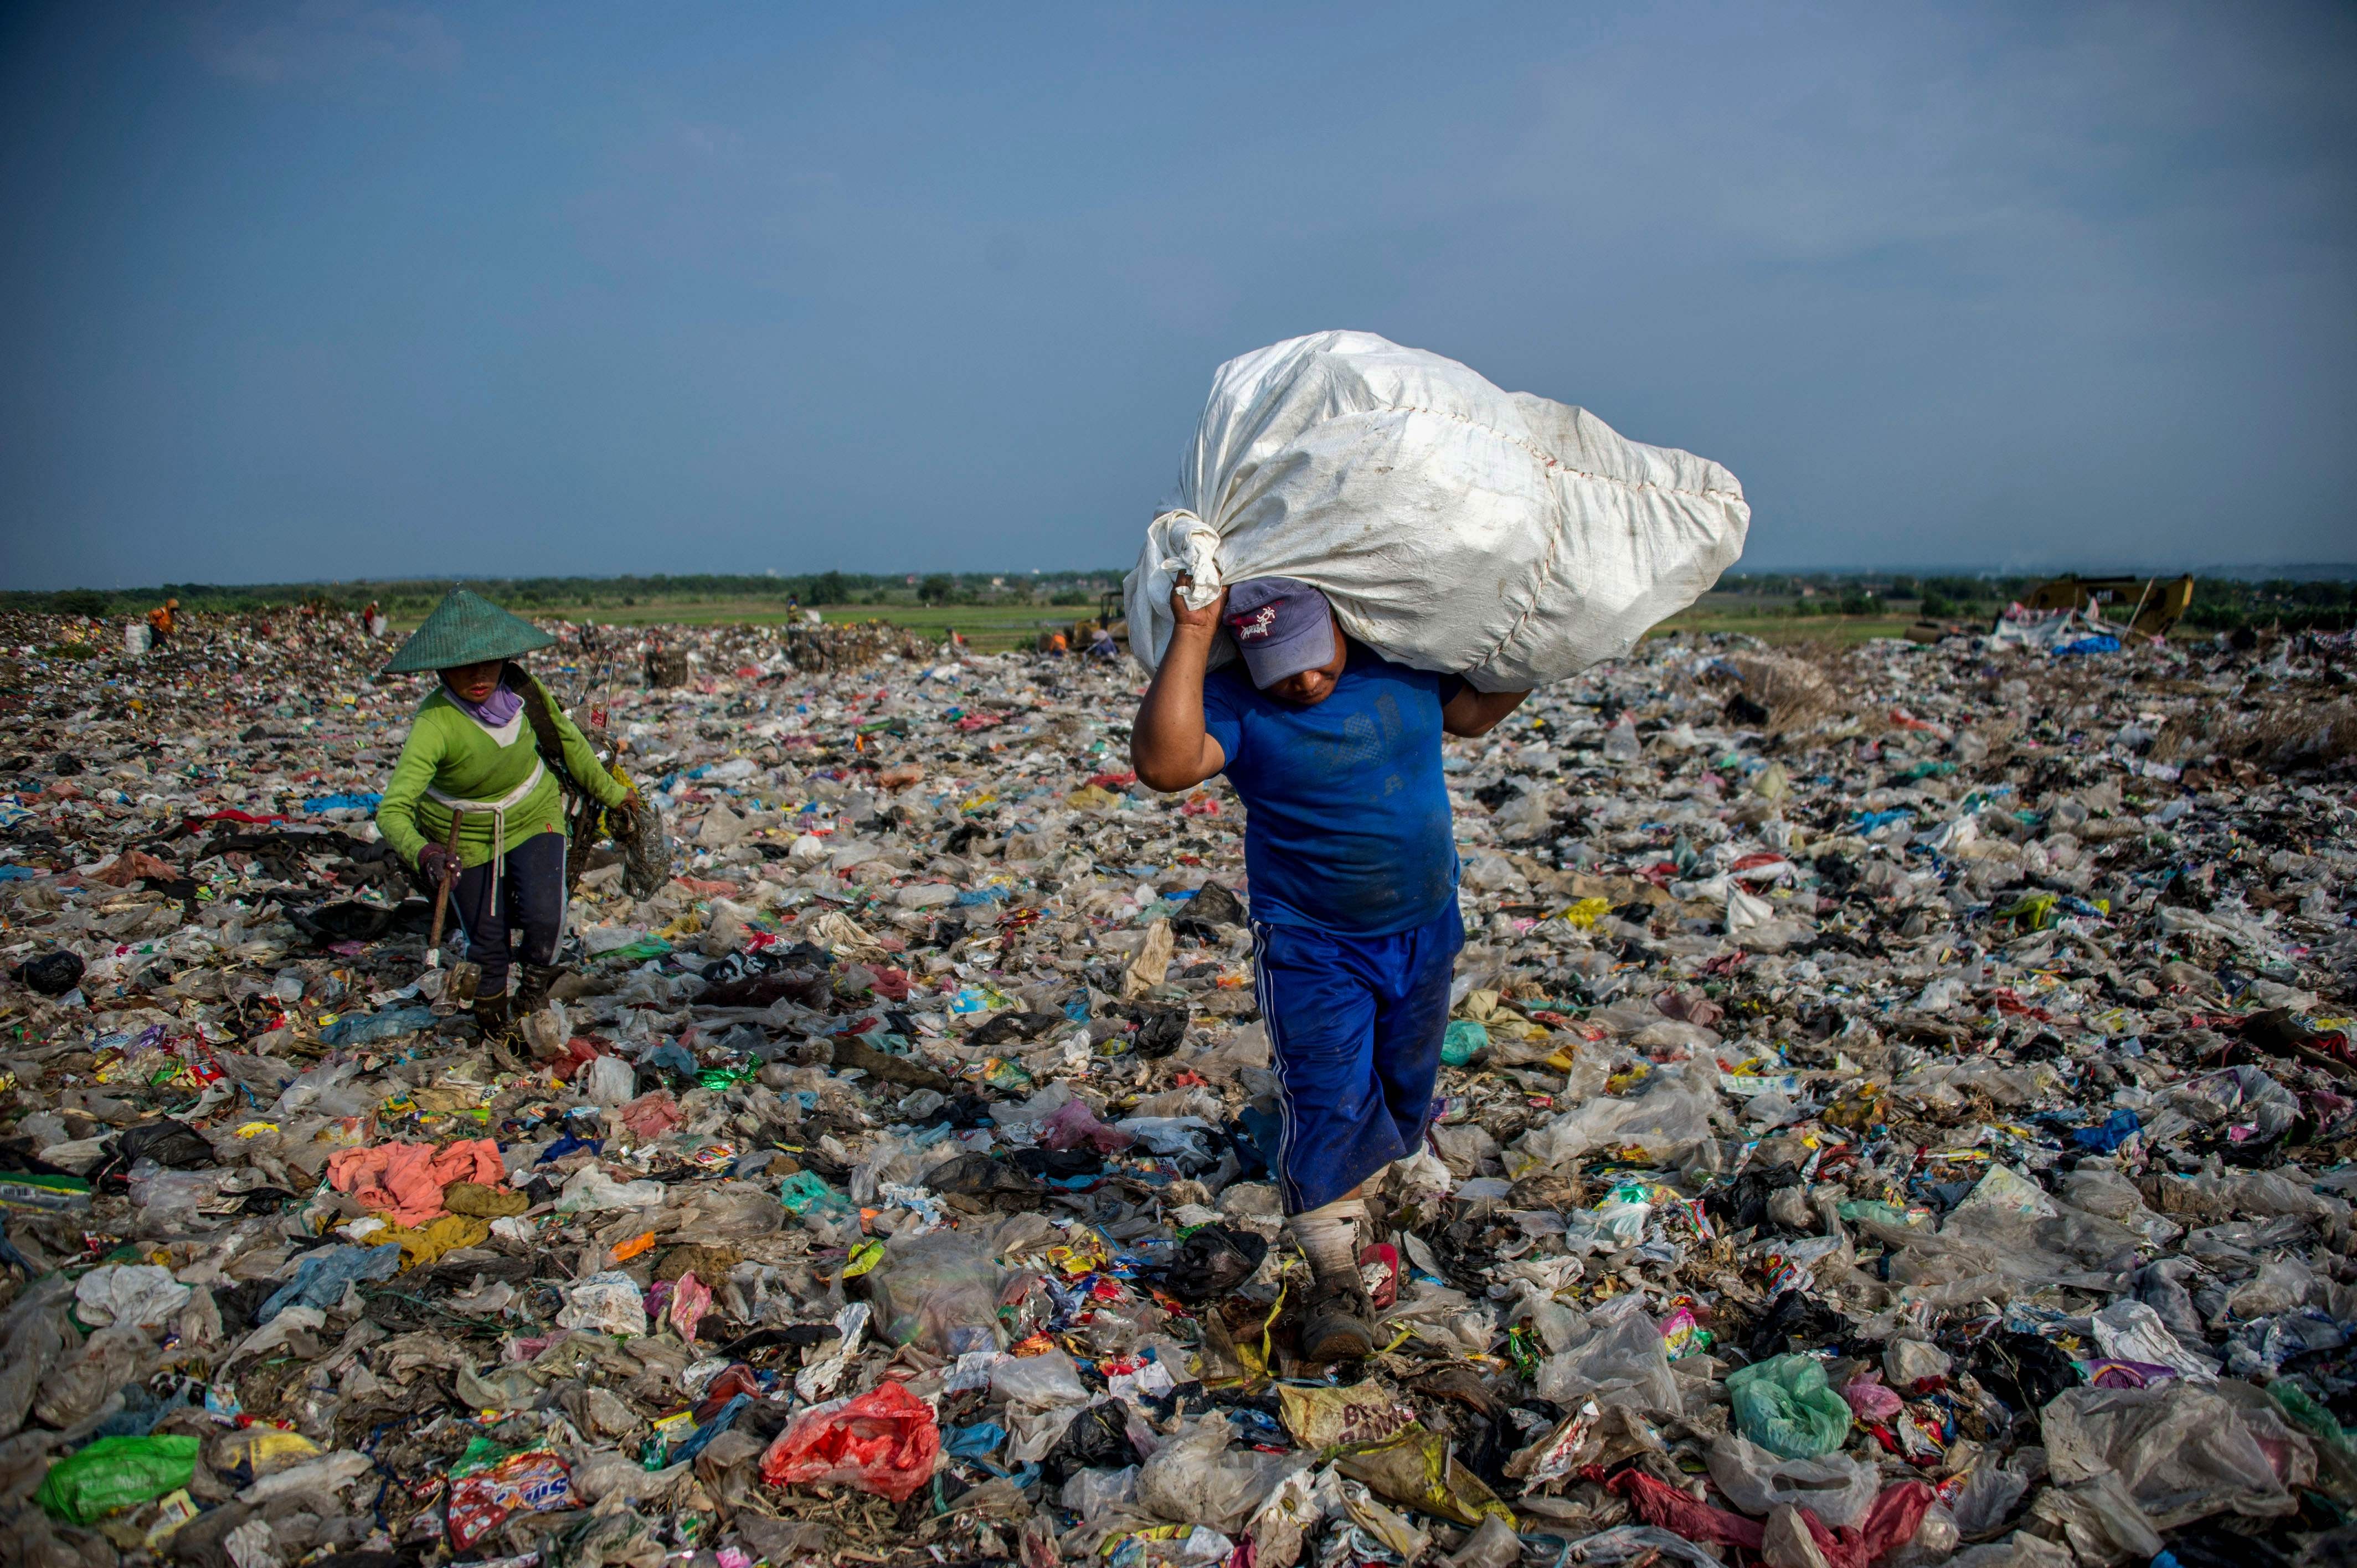 Scavengers collect waste at Sidoarjo garbage dump in East Java, Indonesia, on June 5. About eight million tonnes of plastic waste is dumped into the world’s oceans every year. Photo: AFP